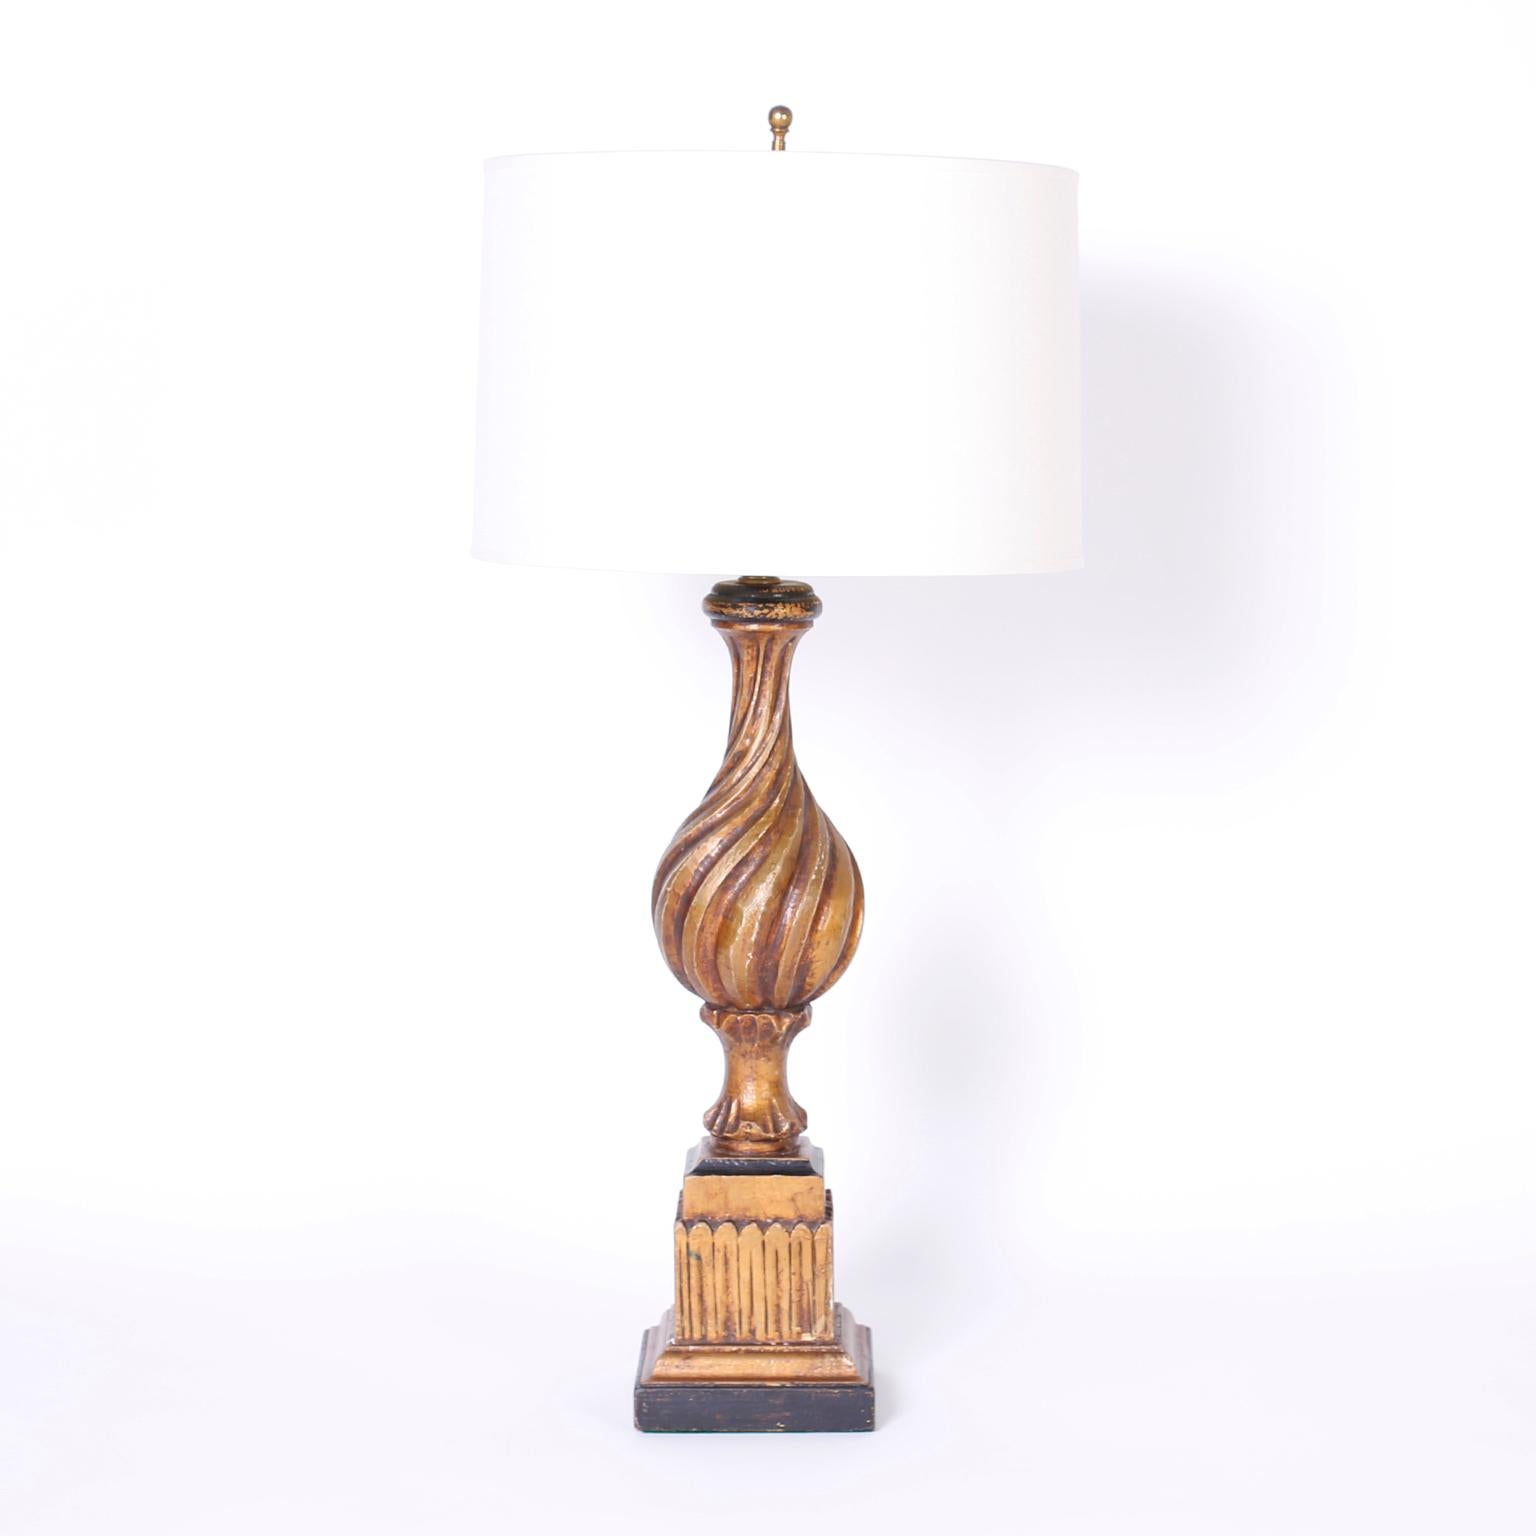 Antique pair of Italian carved wood table lamps with Classic form; turned, carved, gessoed, and gilded then aged to perfection.